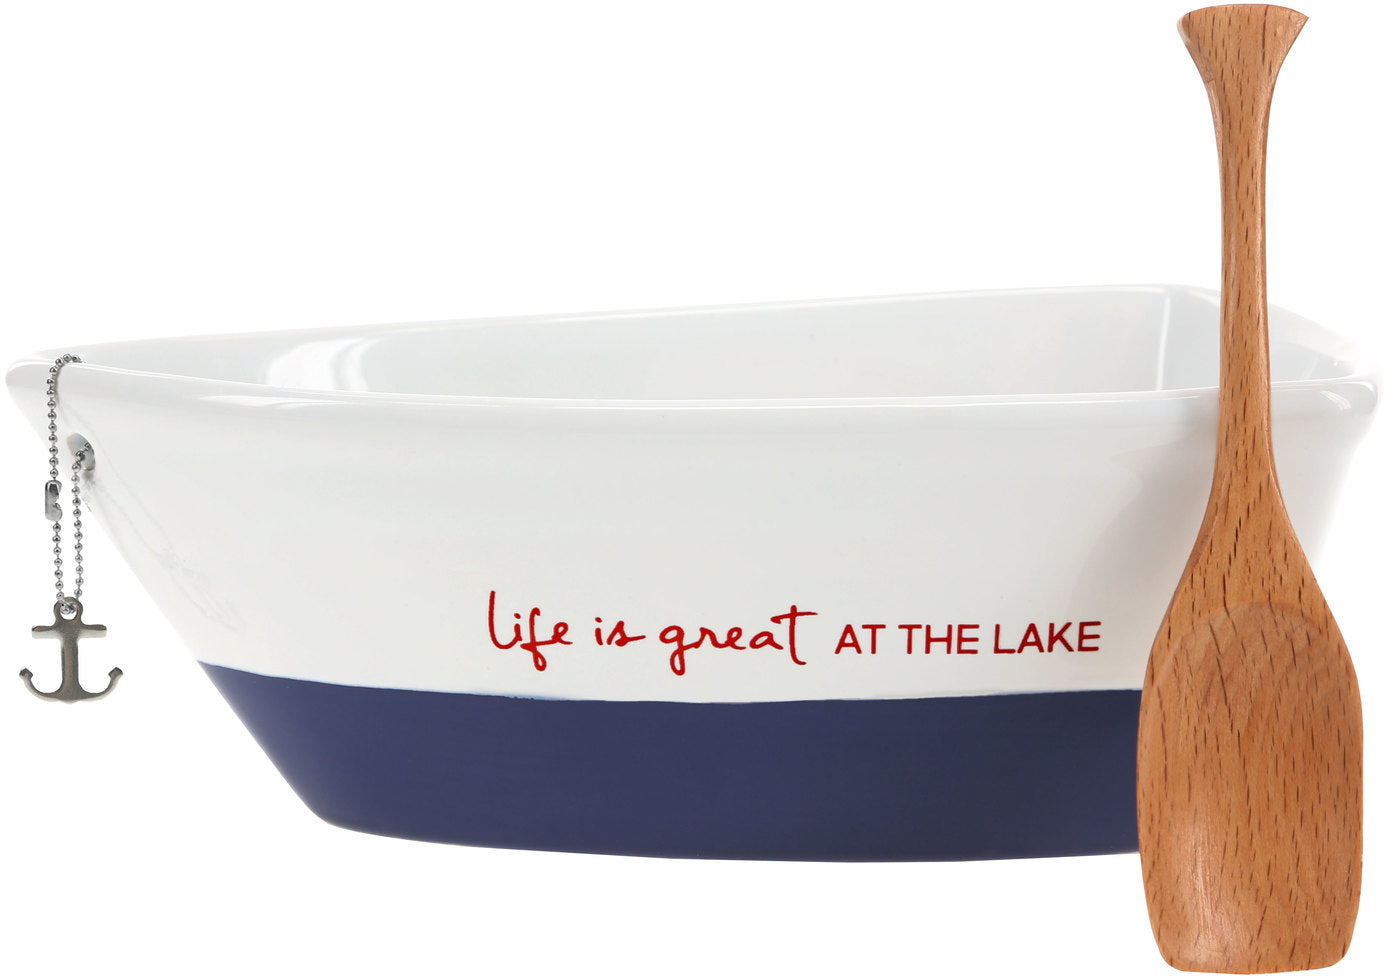 At The Lake 7" Boat Serving Dish with Oar